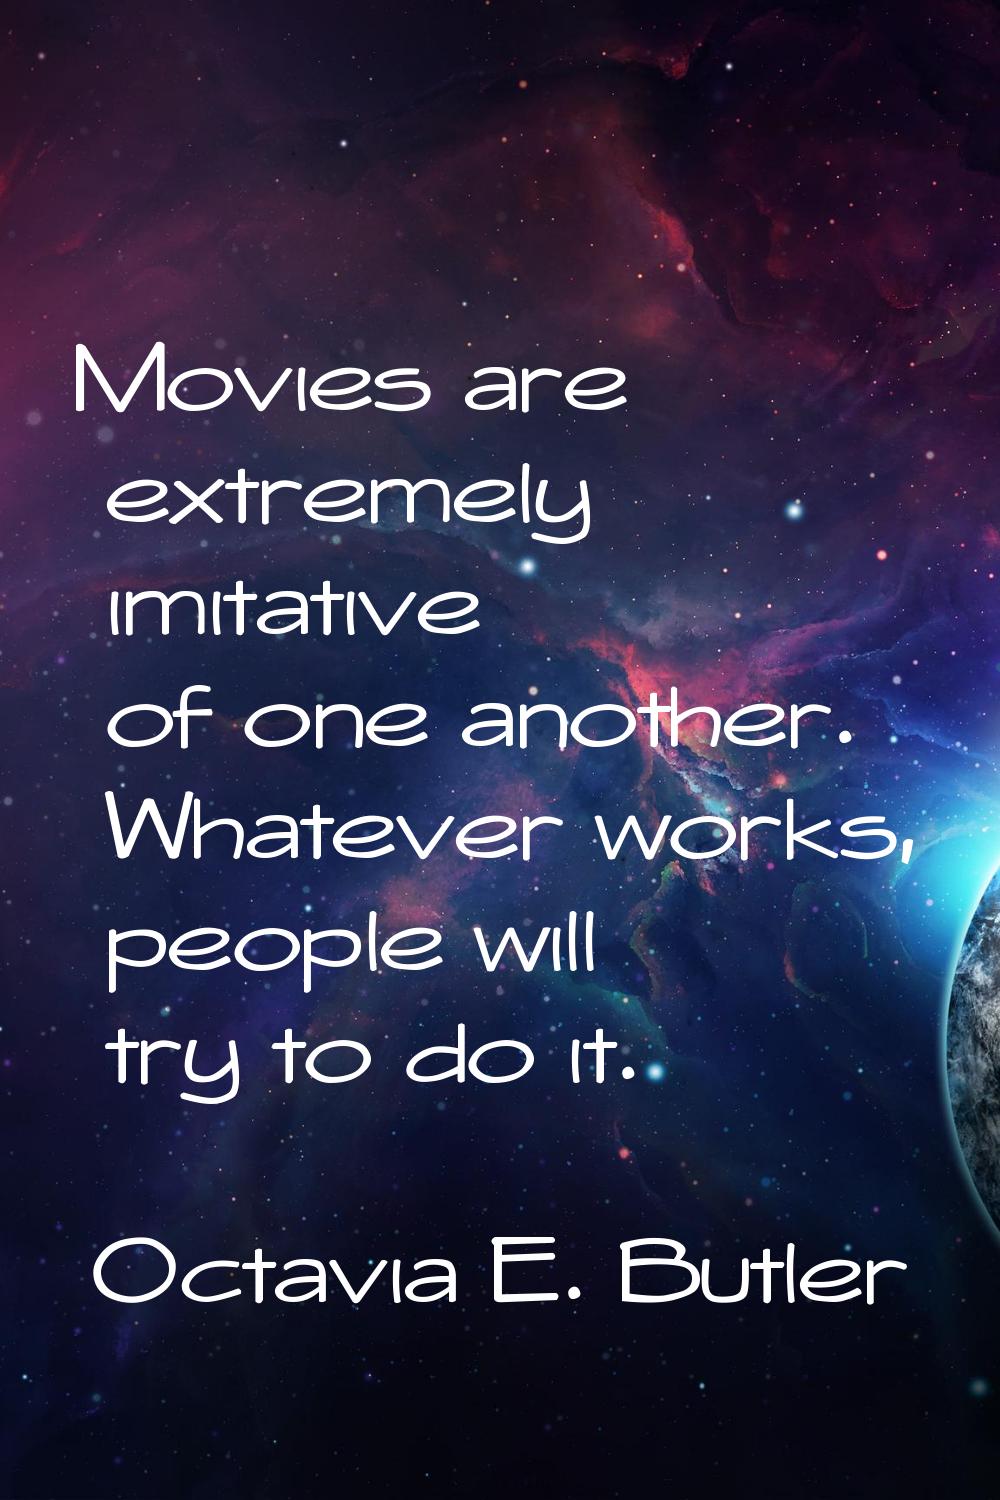 Movies are extremely imitative of one another. Whatever works, people will try to do it.